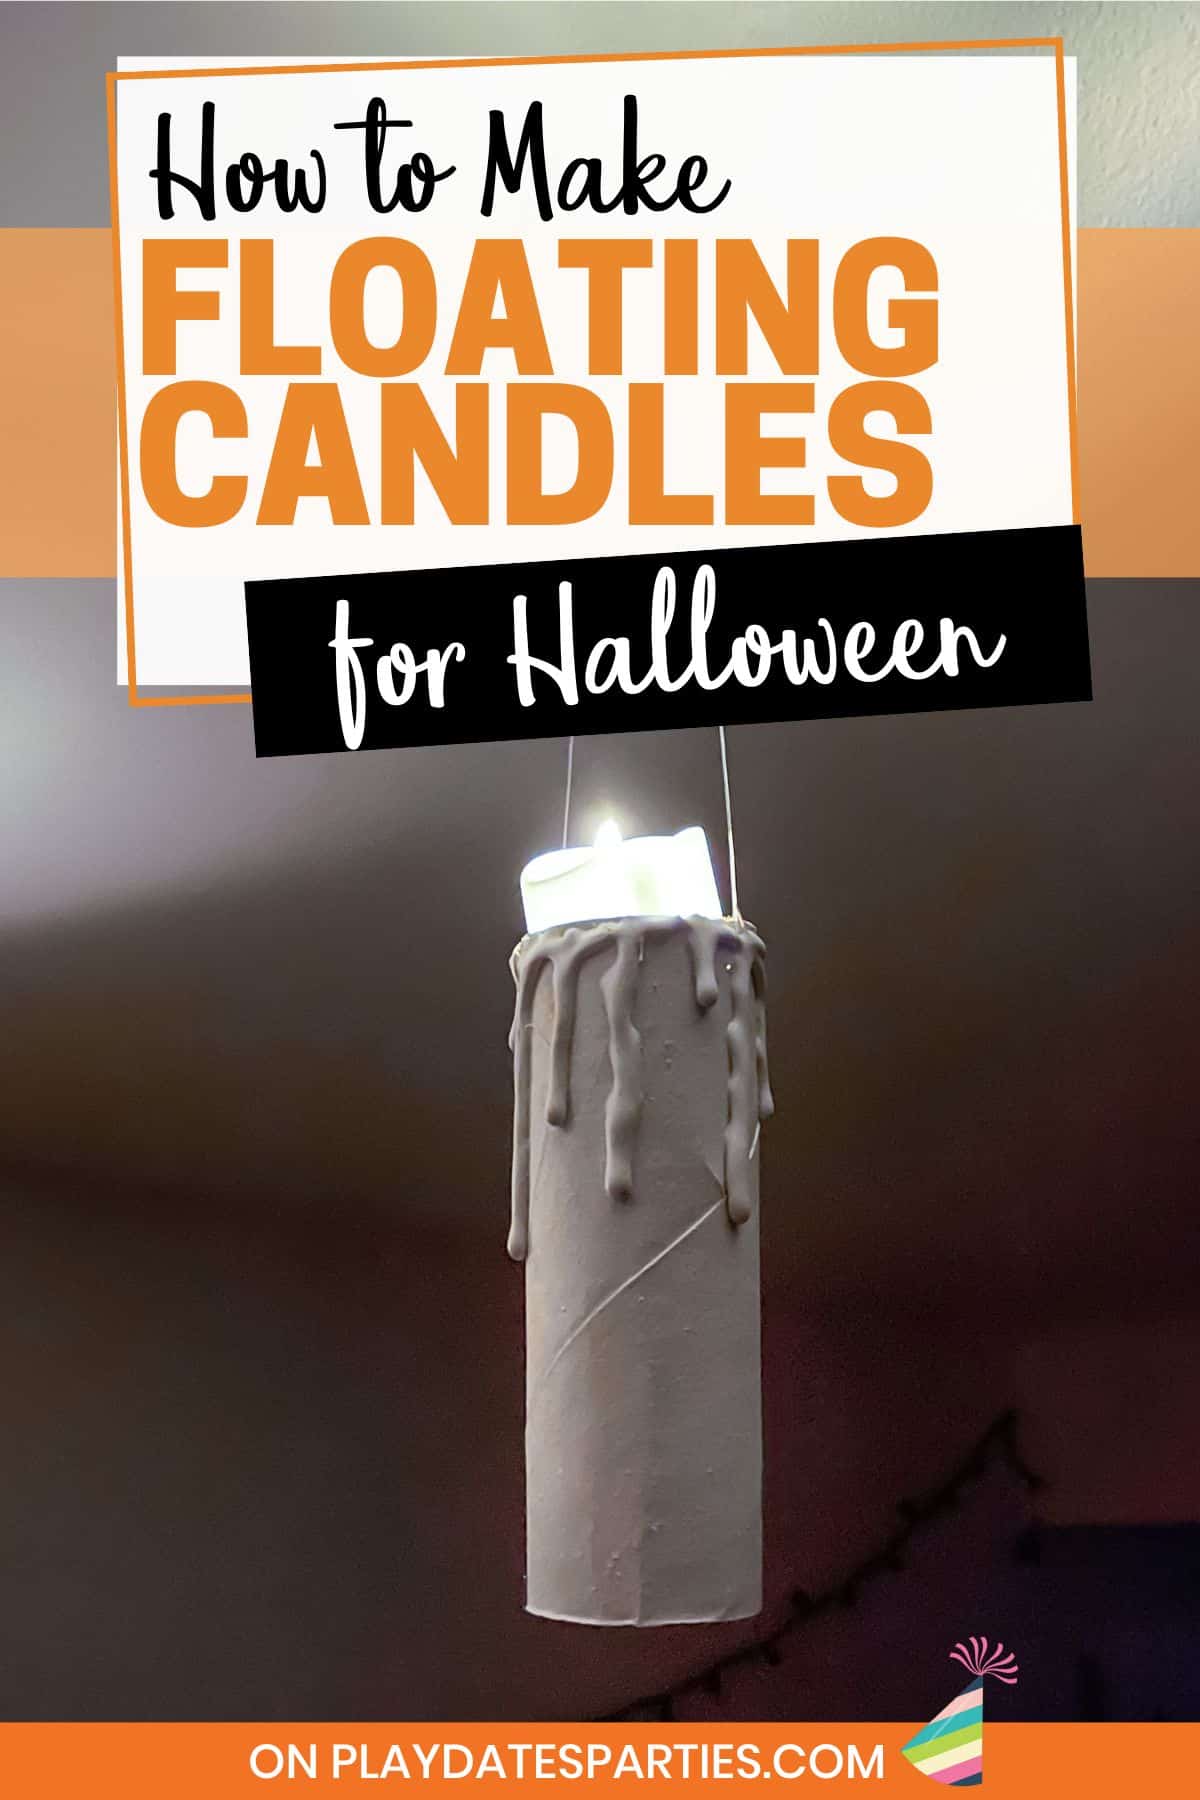 A fake candle glows in a dark room with text overlay how to make floating candles for Halloween.